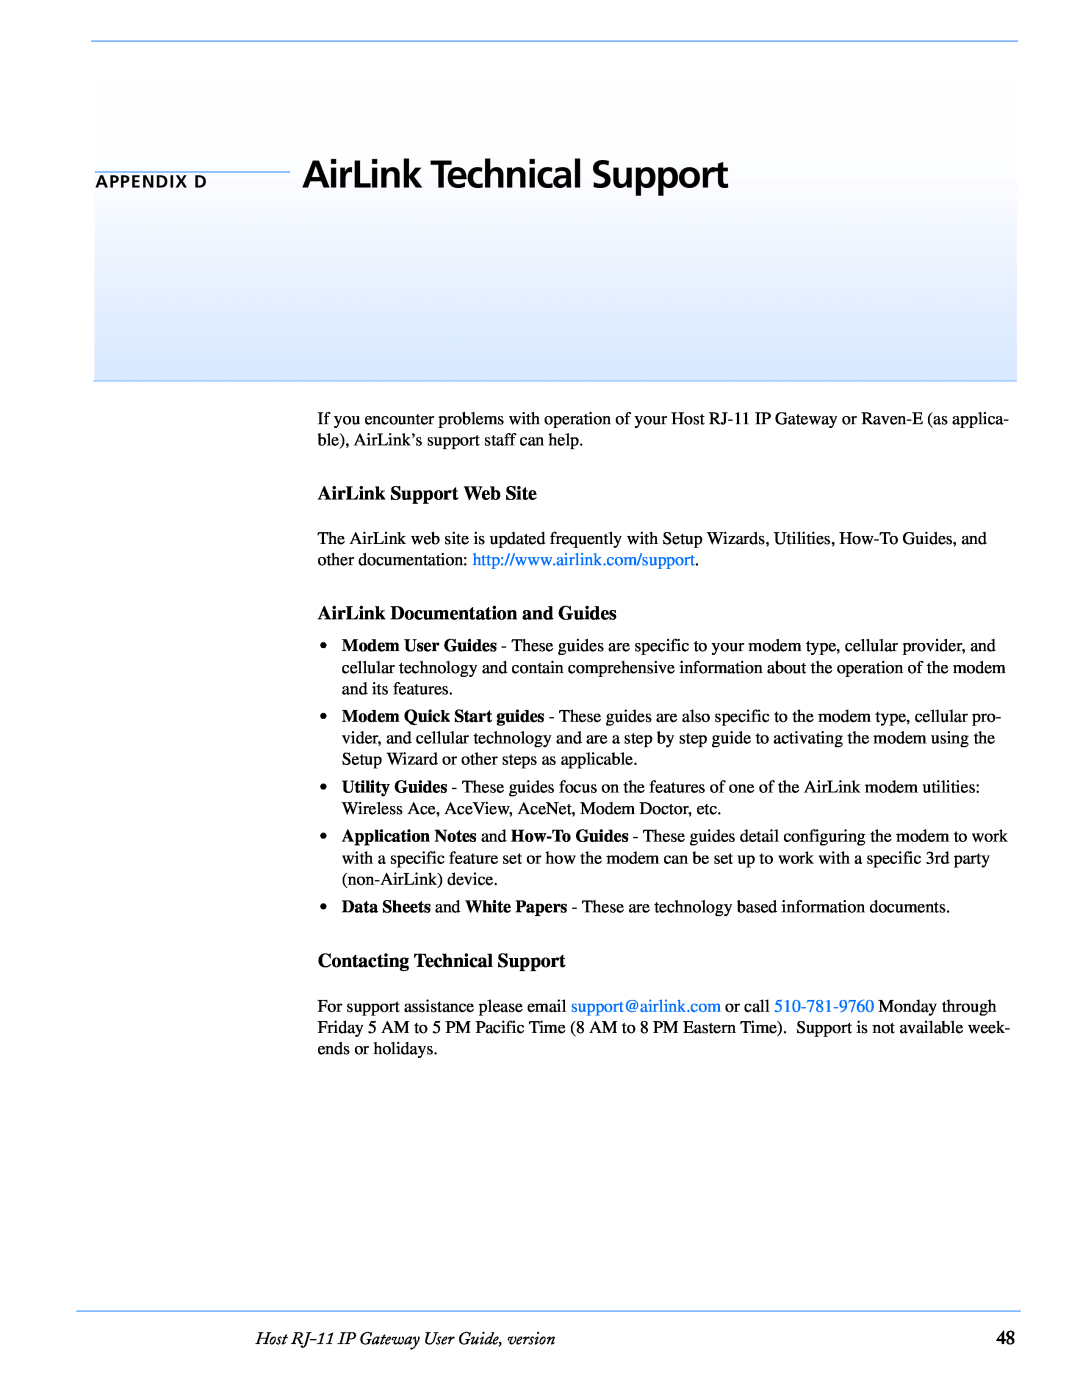 Airlink RJ-11 manual AirLink Technical Support, AirLink Support Web Site, AirLink Documentation and Guides, Appendix D 